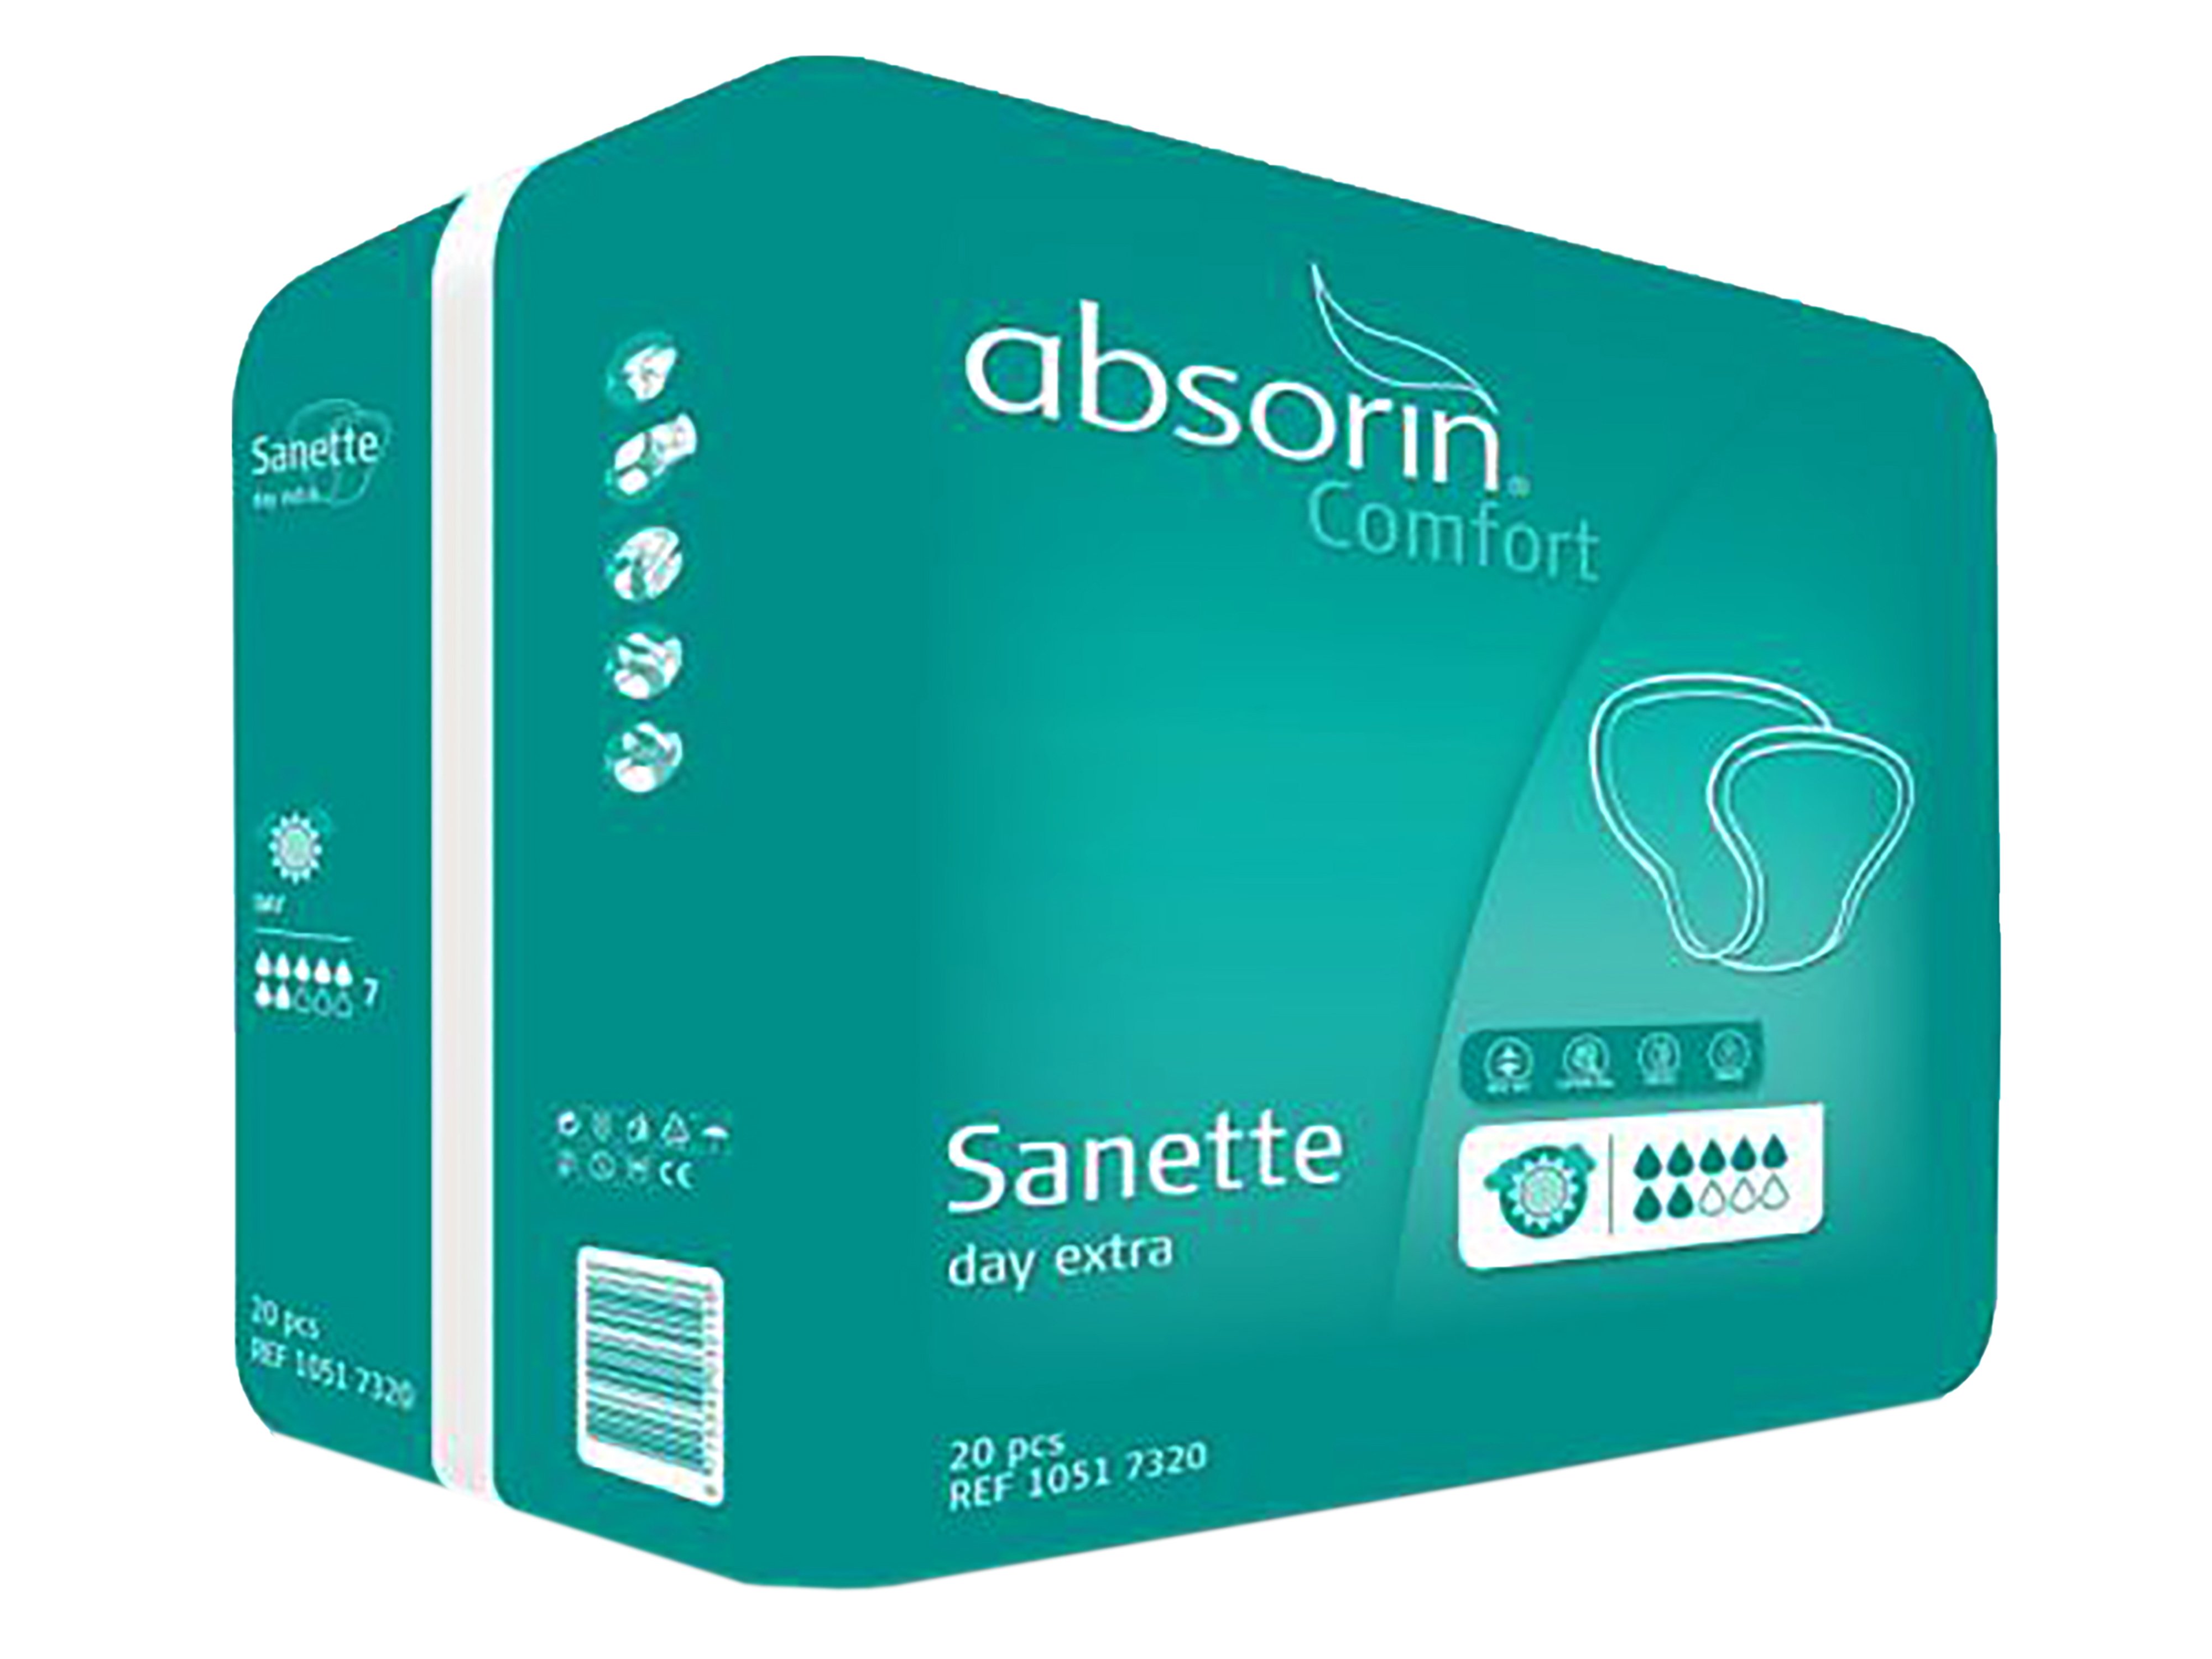 Absorin Comfort Sanette Day extra, 20 stk